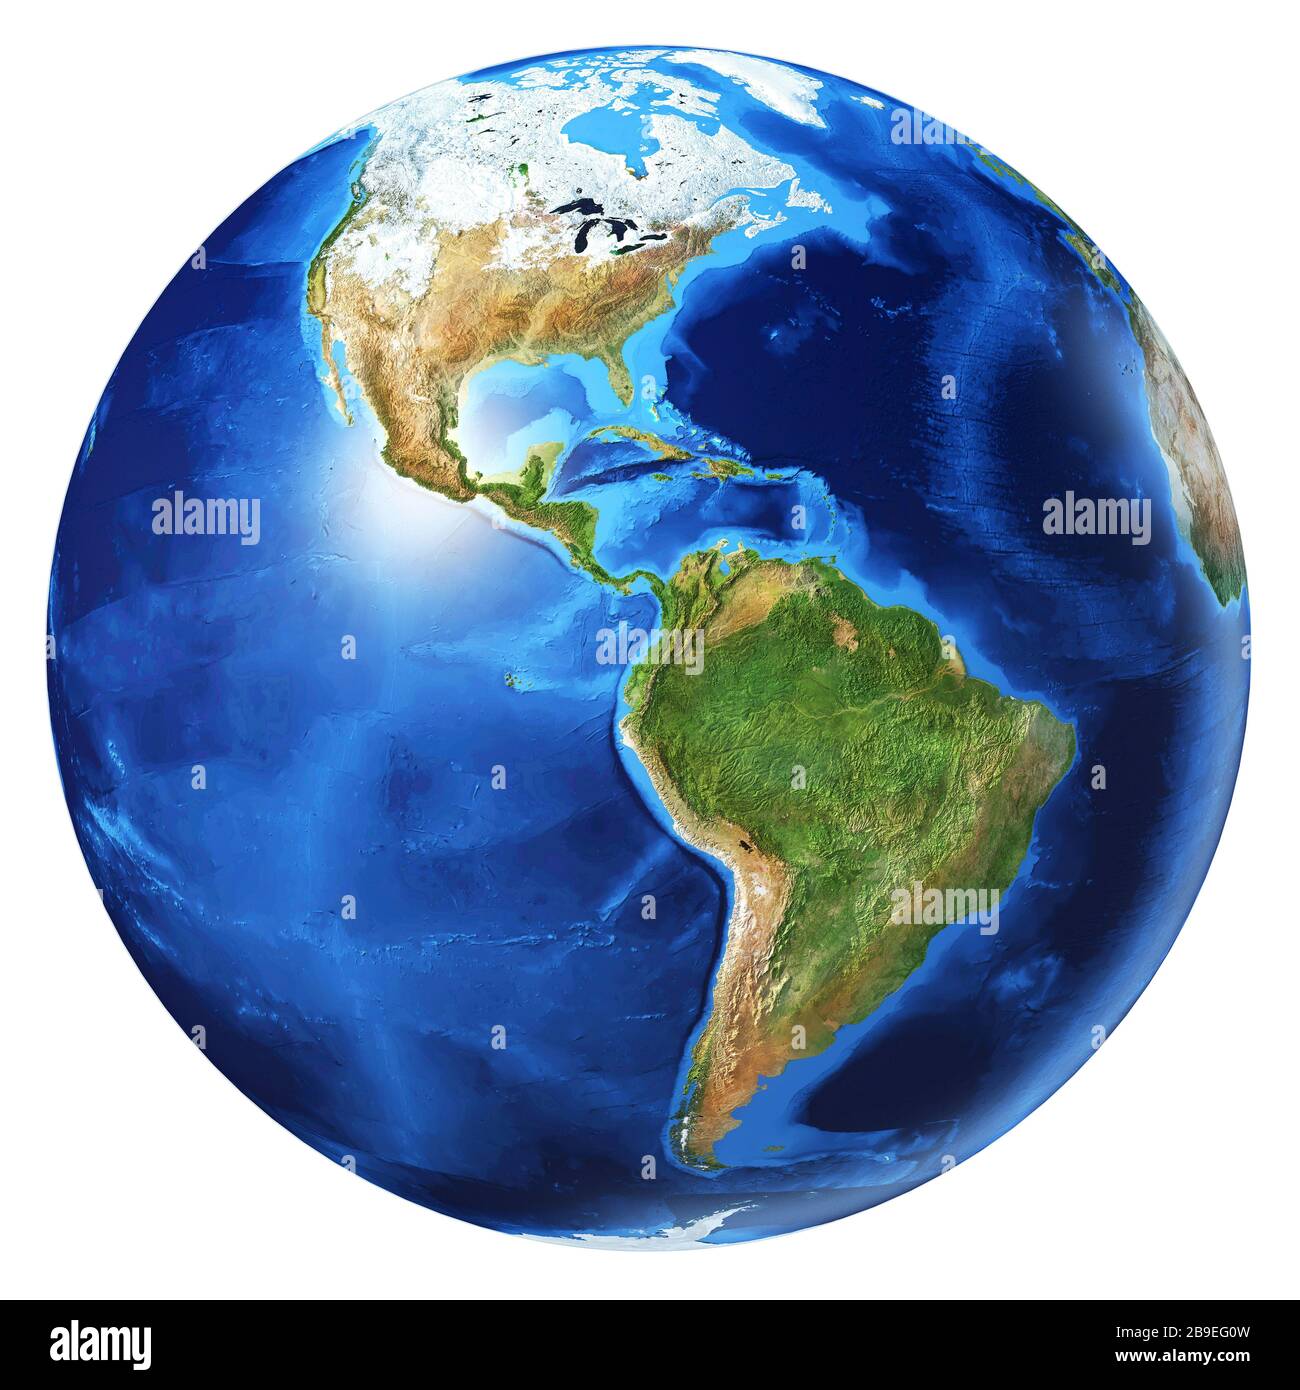 3D illustration of planet Earth, centered on North and South America. Stock Photo